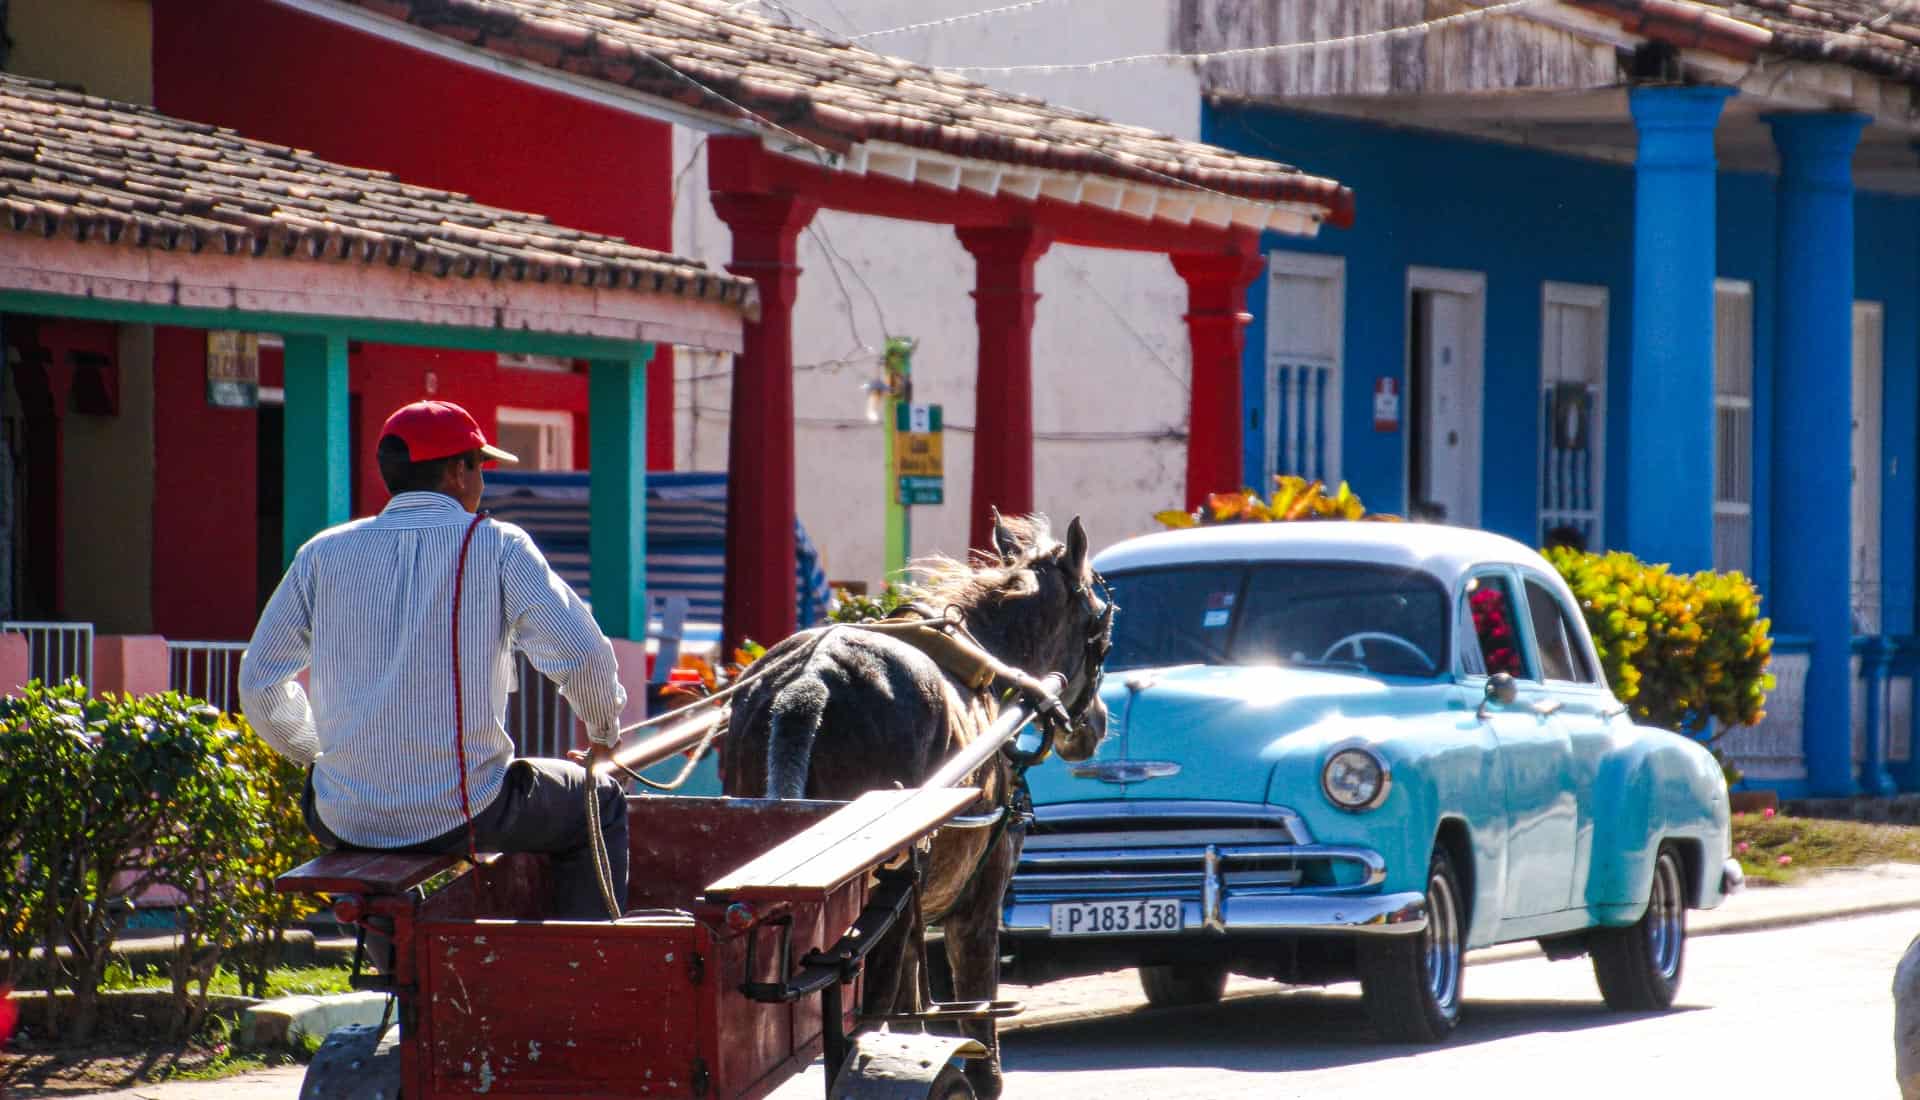 A horsecart passes a vintage car on the streets of Viñales, a typical sight on a Cuba itinerary.